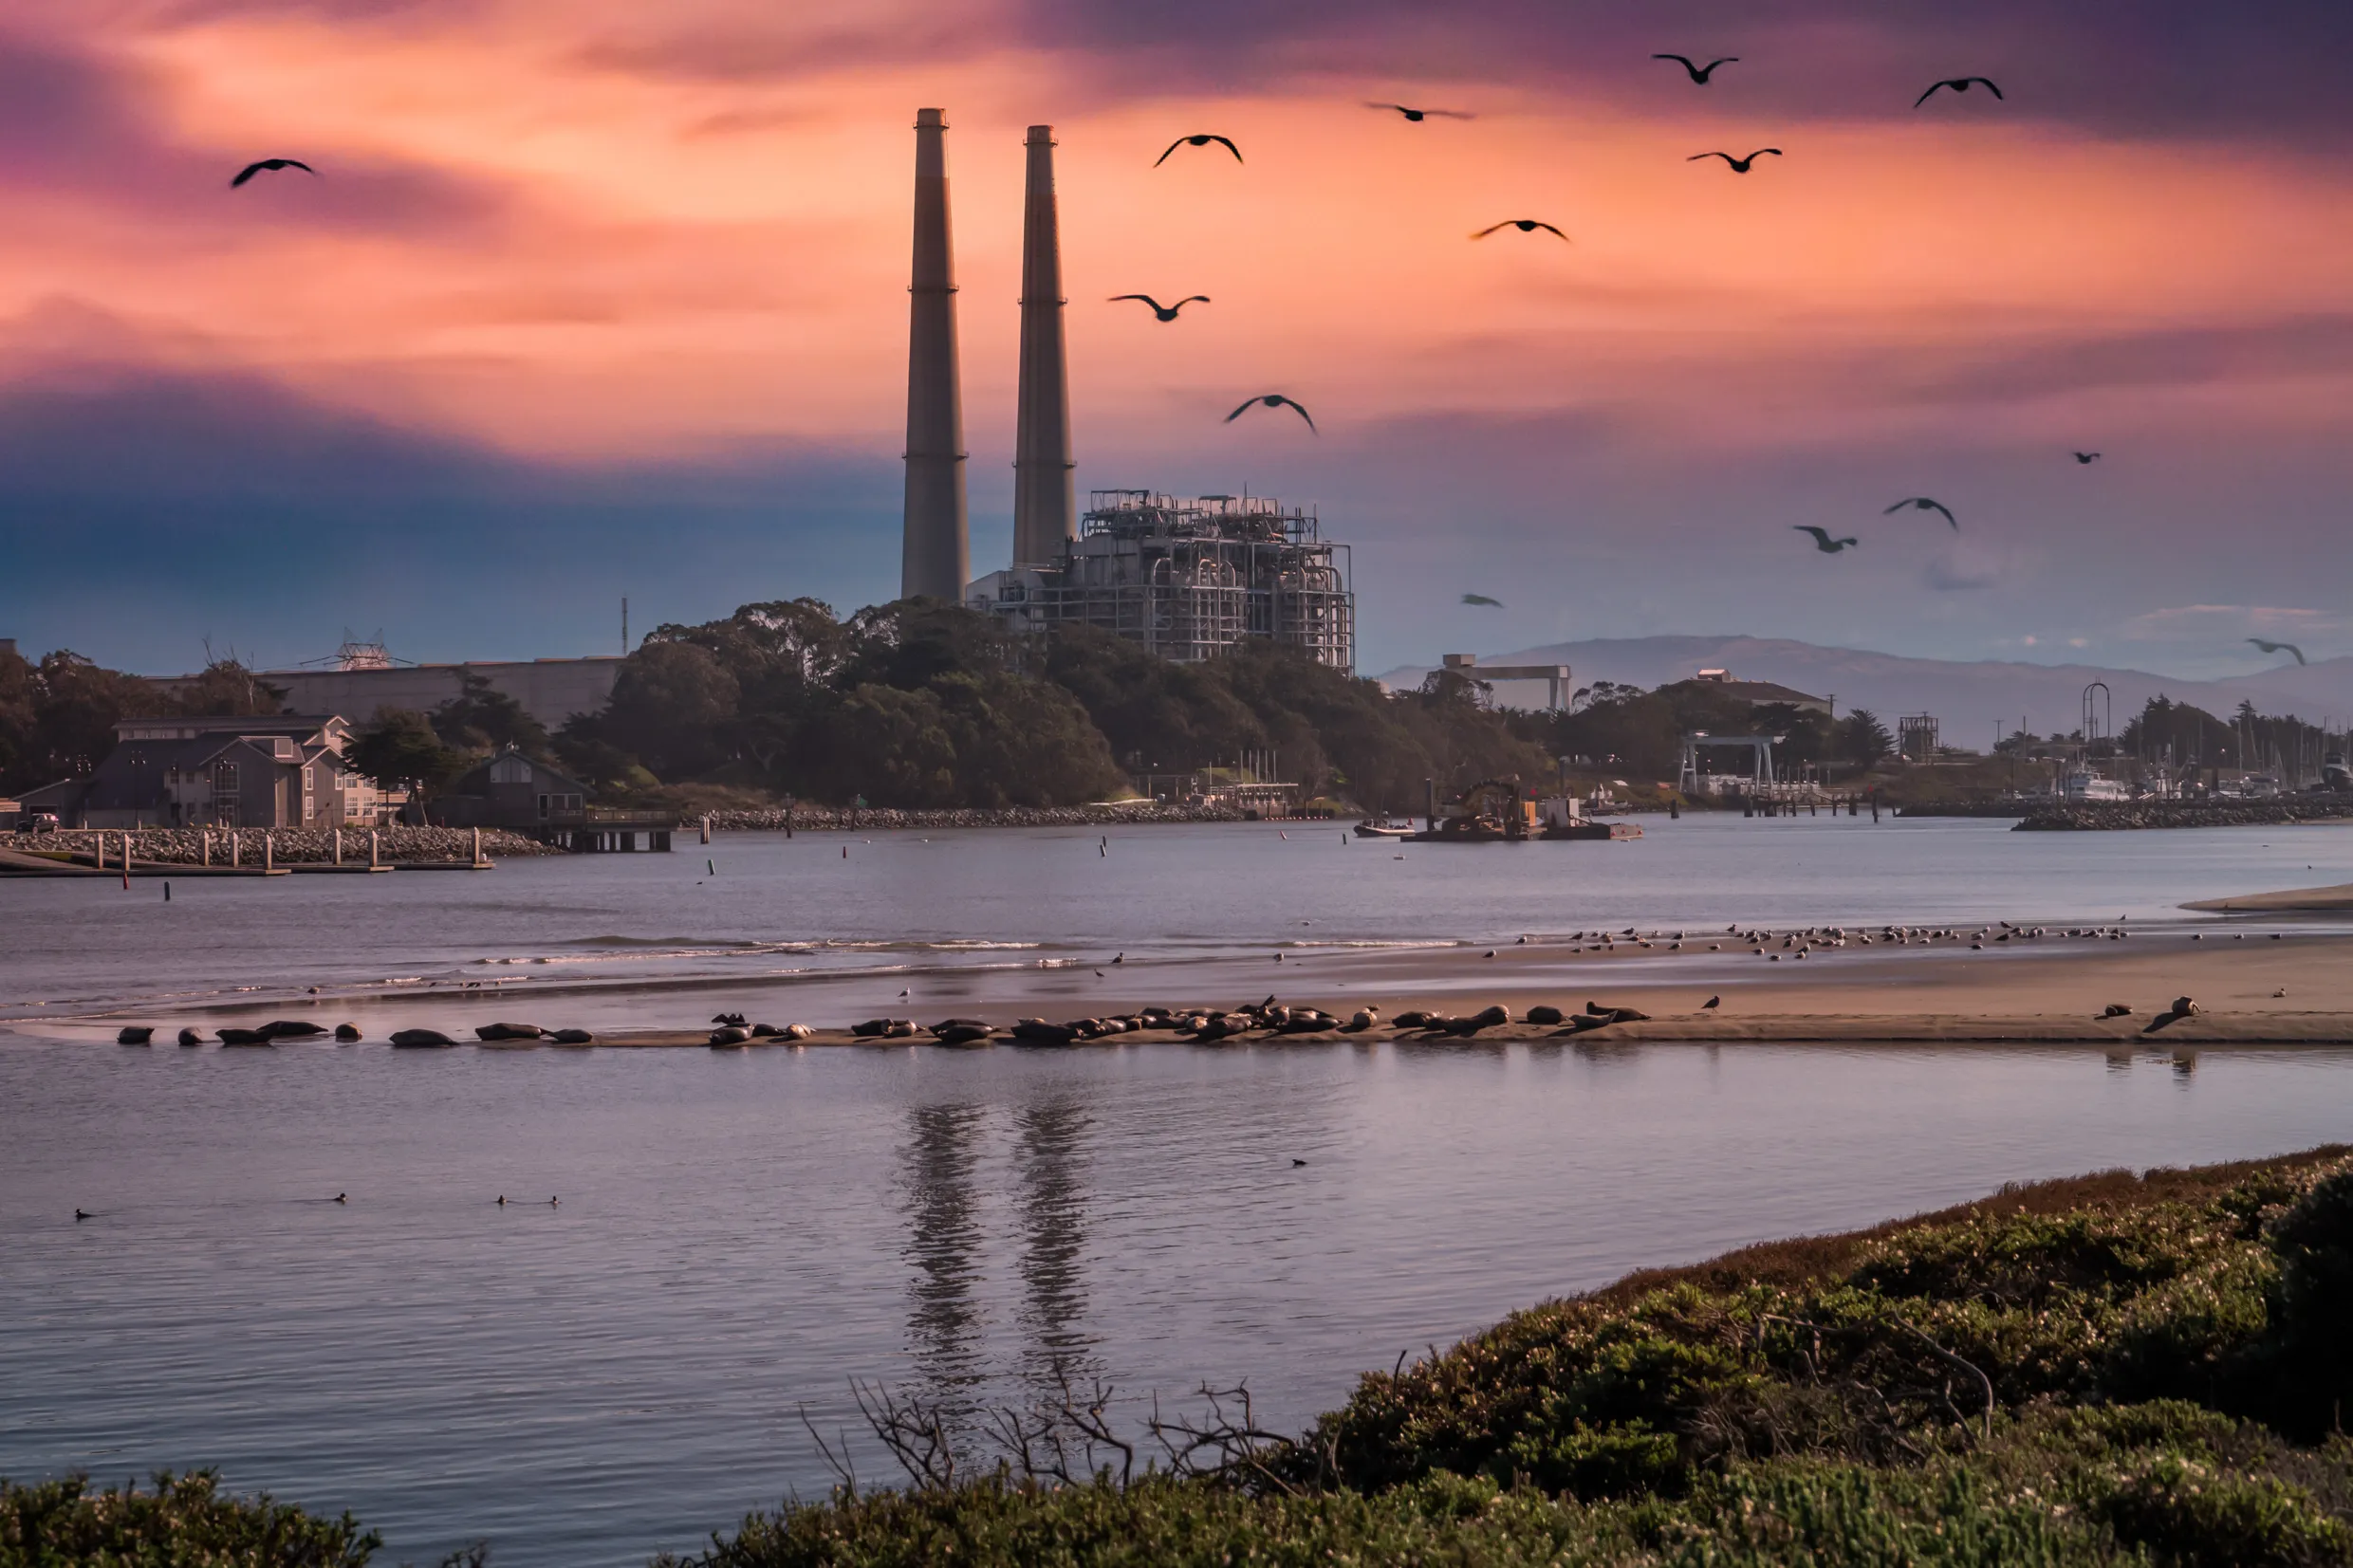 Sunset image of Moss Landing Harbor and natural gas power plant, with harbor seals and seagulls on a protected beach,